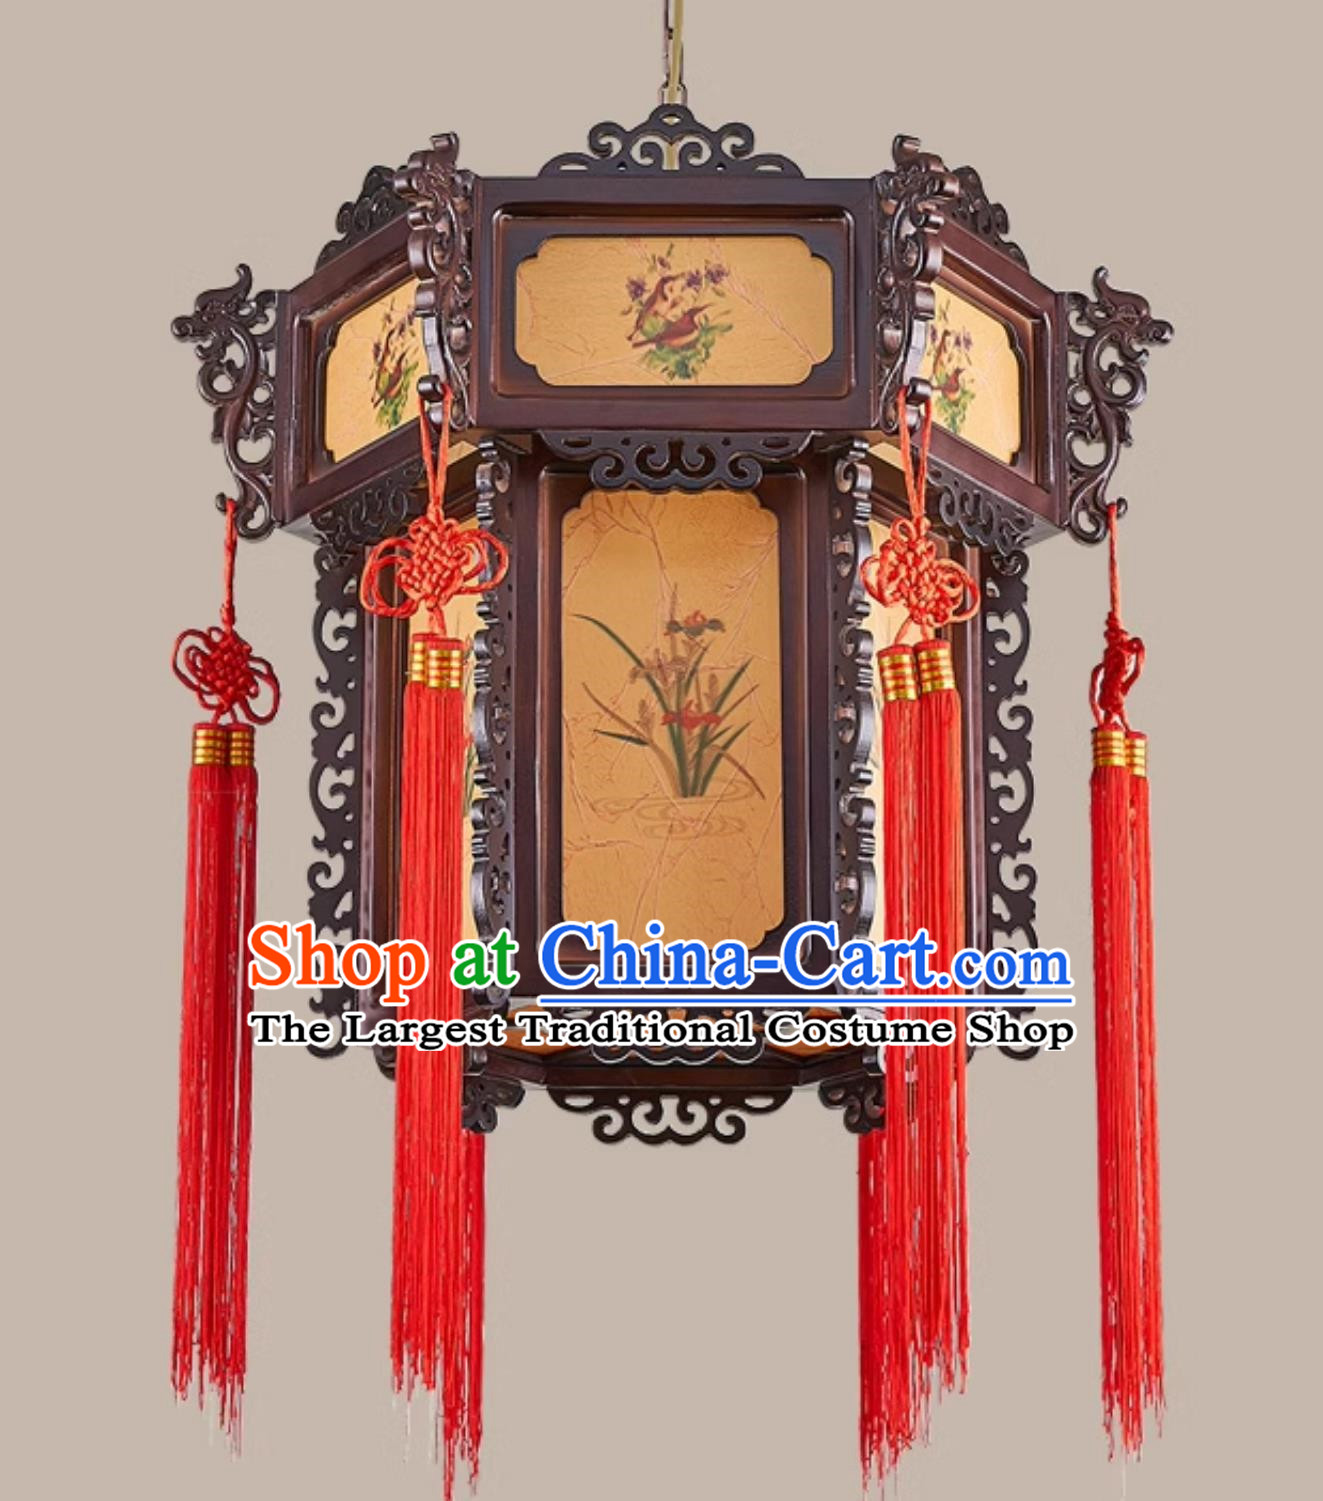 24 Inches Diameter Chinese Lantern Chandelier Antique Hexagonal Faucet Palace Lantern Classical Solid Wood Lamp Chinese Style